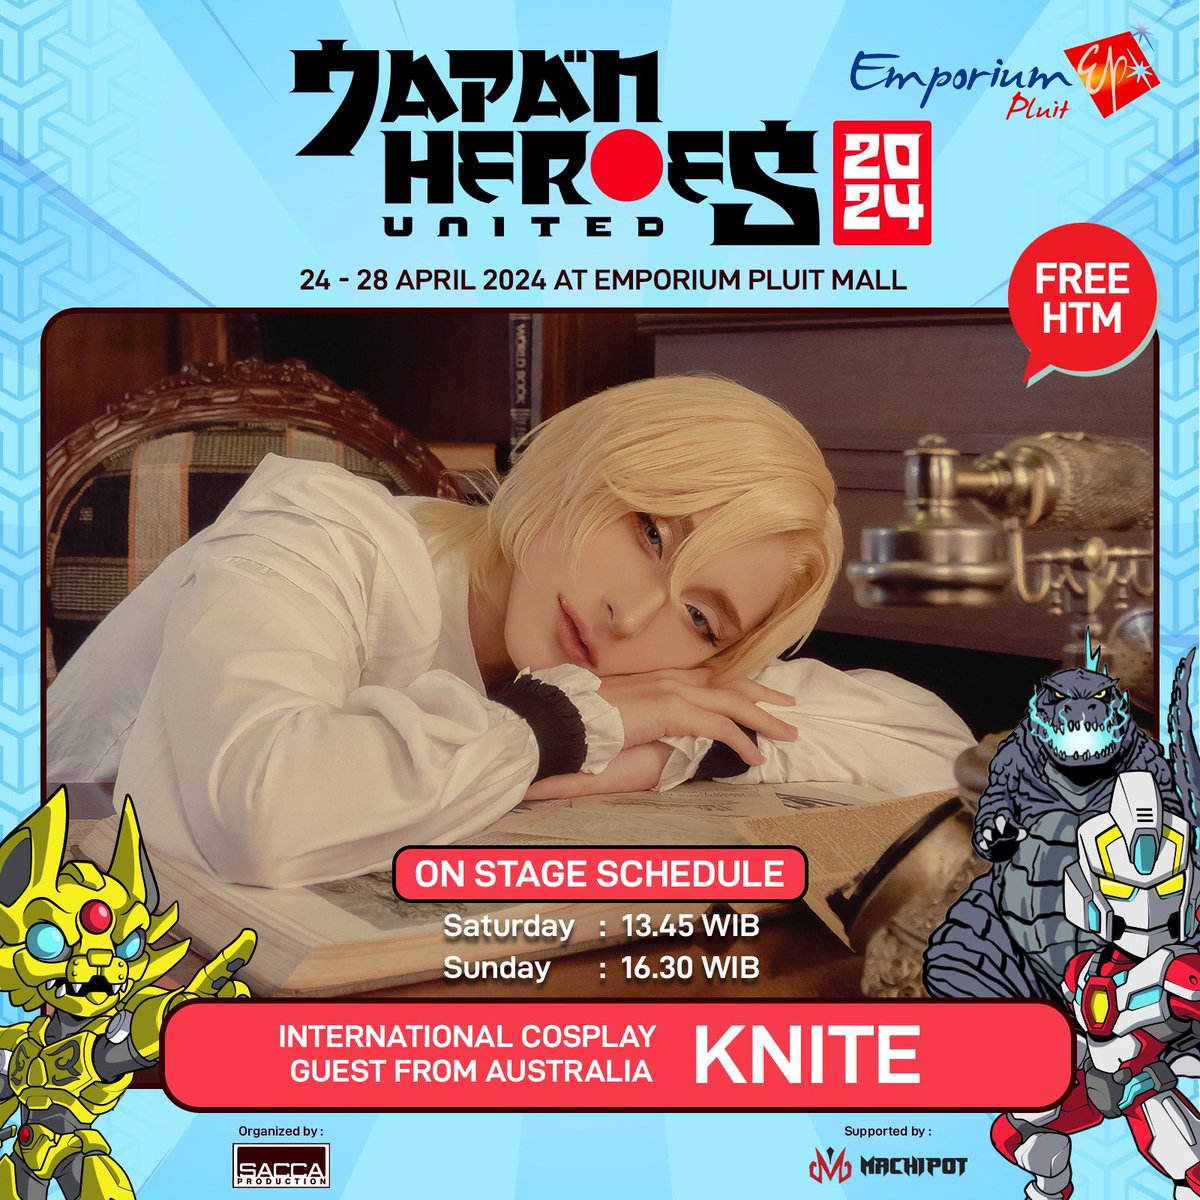 A SPECIAL GUEST for JAPAN HEROES UNITED this year! Please welcome our International Guest Cosplayer, ✨ KNITE @knitecoser ✨ KNITE is a Professional Greek Cosplayer, Model, Streamer and Performer based on Sydney, Australia. Come and meet KNITE at #EMPOMall!